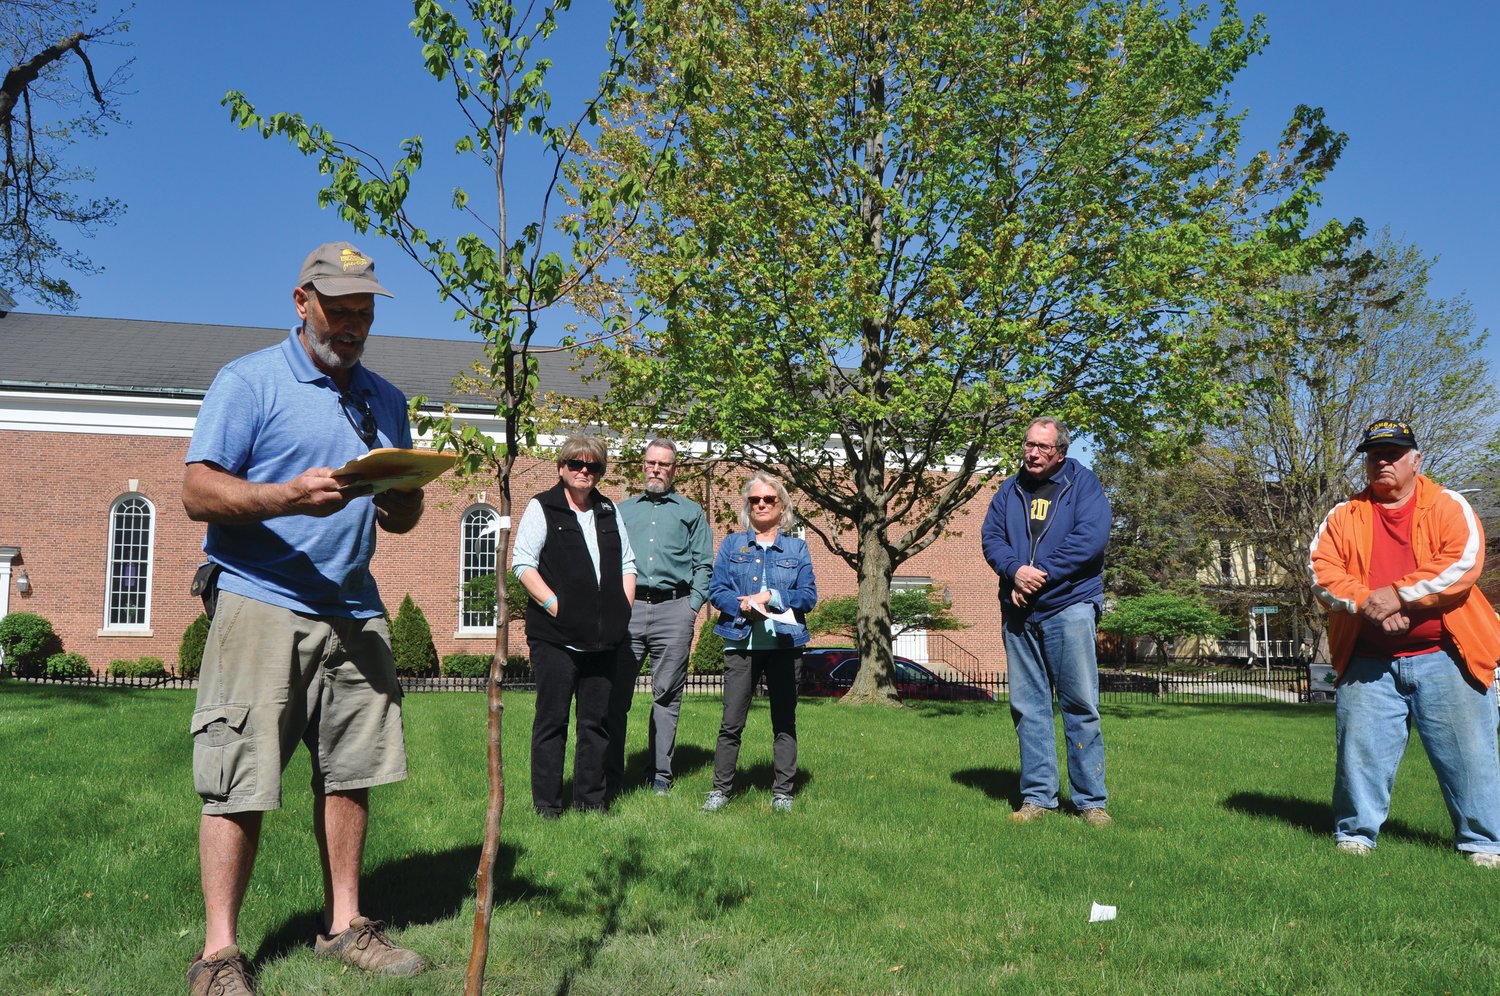 Mark Davidson, owner of Davidson’s Greenhouse & Nursery, speaks about his late friend Don Bickel as members of Crawfordsville Main Street and Bickel’s son, Jeff, look on at the Lane Place Friday. Main Street planted an American Hornbeam tree in tribute to Don Bickel, who was a local naturalist.